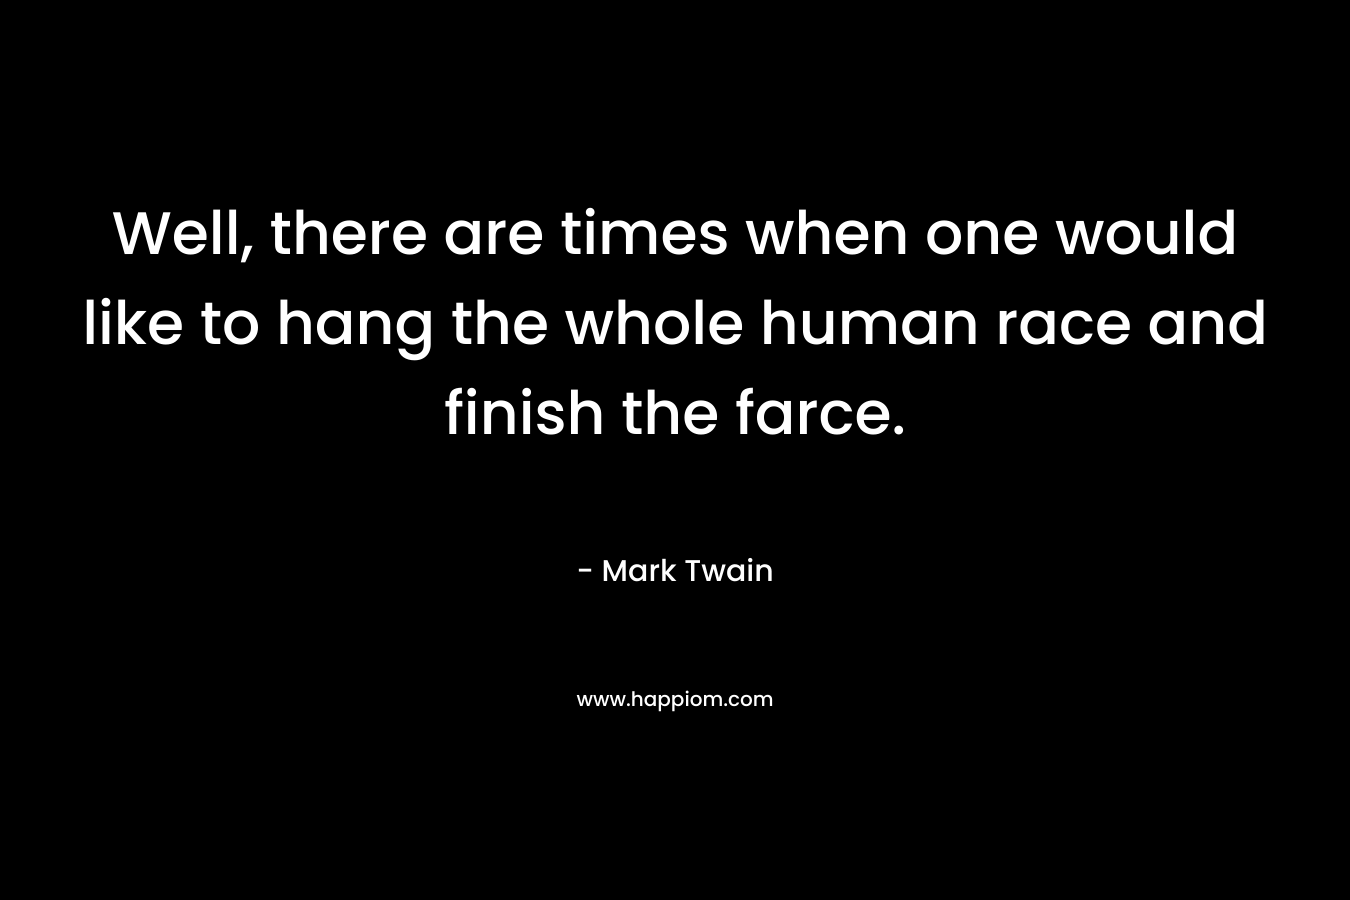 Well, there are times when one would like to hang the whole human race and finish the farce. – Mark Twain